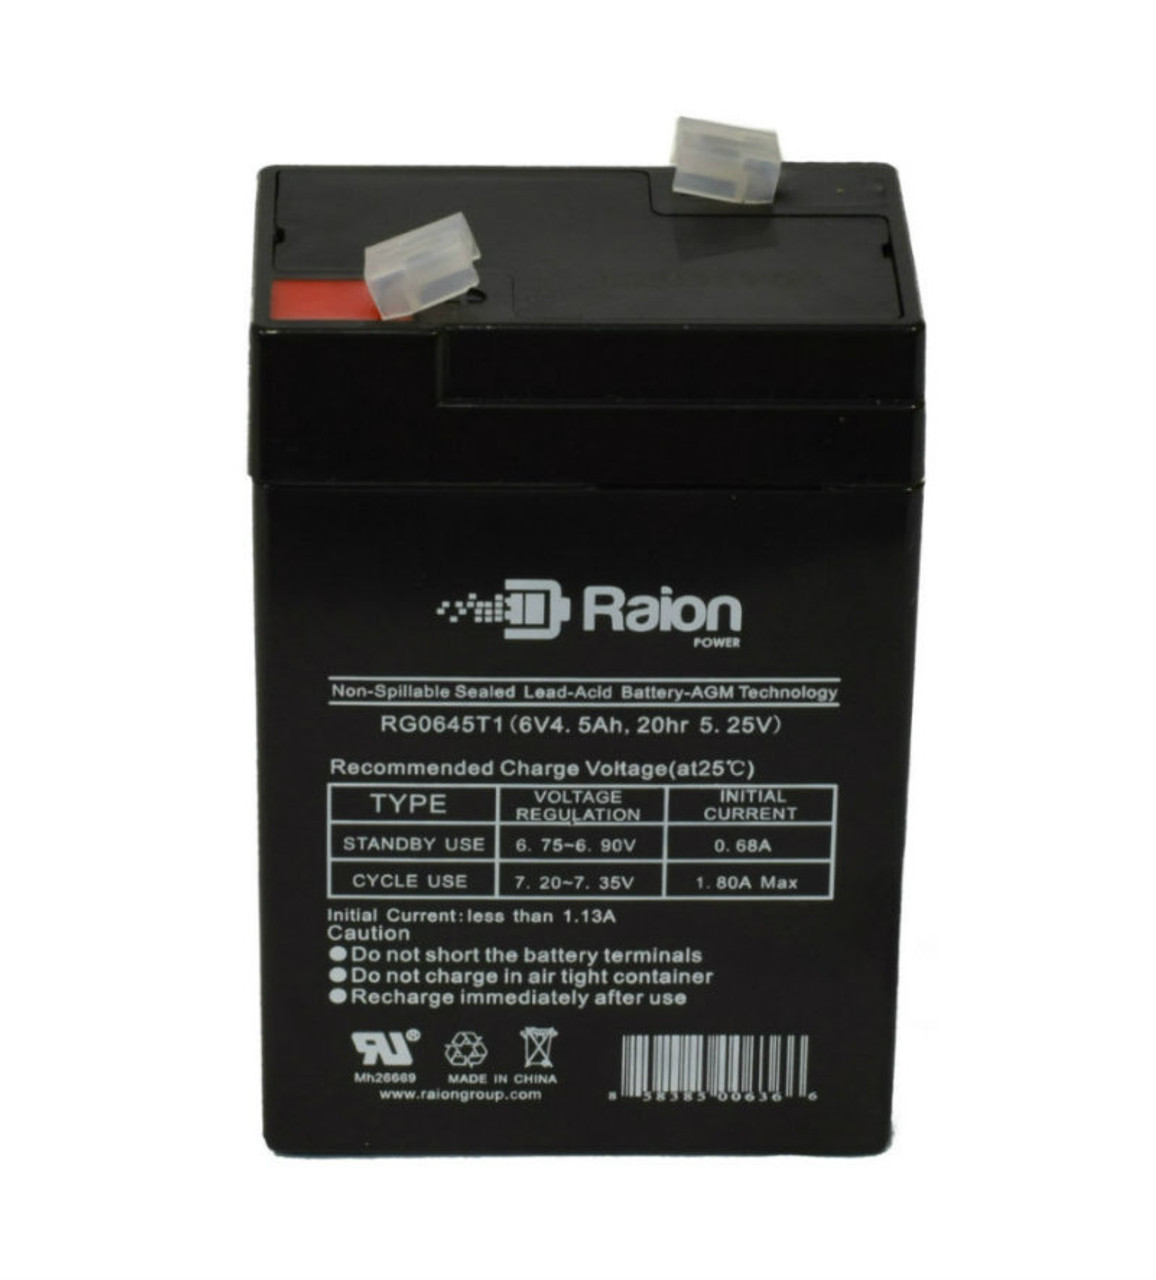 Raion Power RG0645T1 Replacement Battery Cartridge for GS Portalac PE46RF3CL